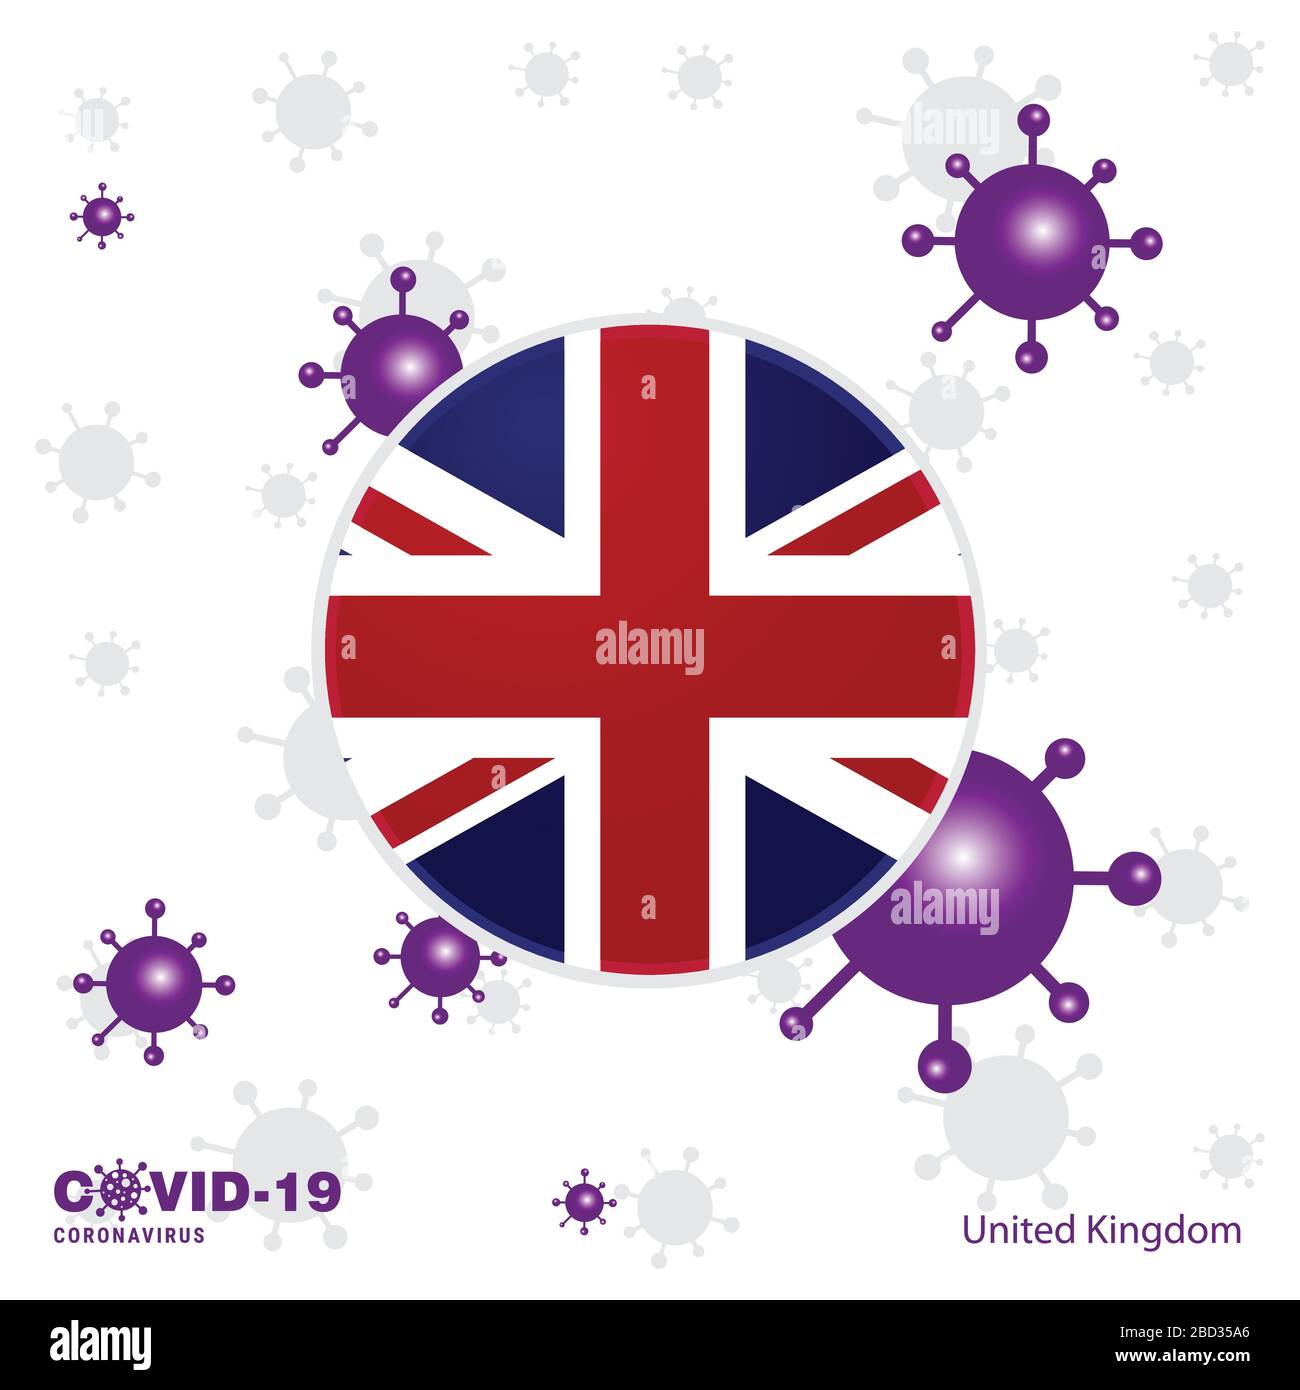 Pray For United Kingdom. COVID-19 Coronavirus Typography Flag. Stay home, Stay Healthy. Take care of your own health Stock Vector